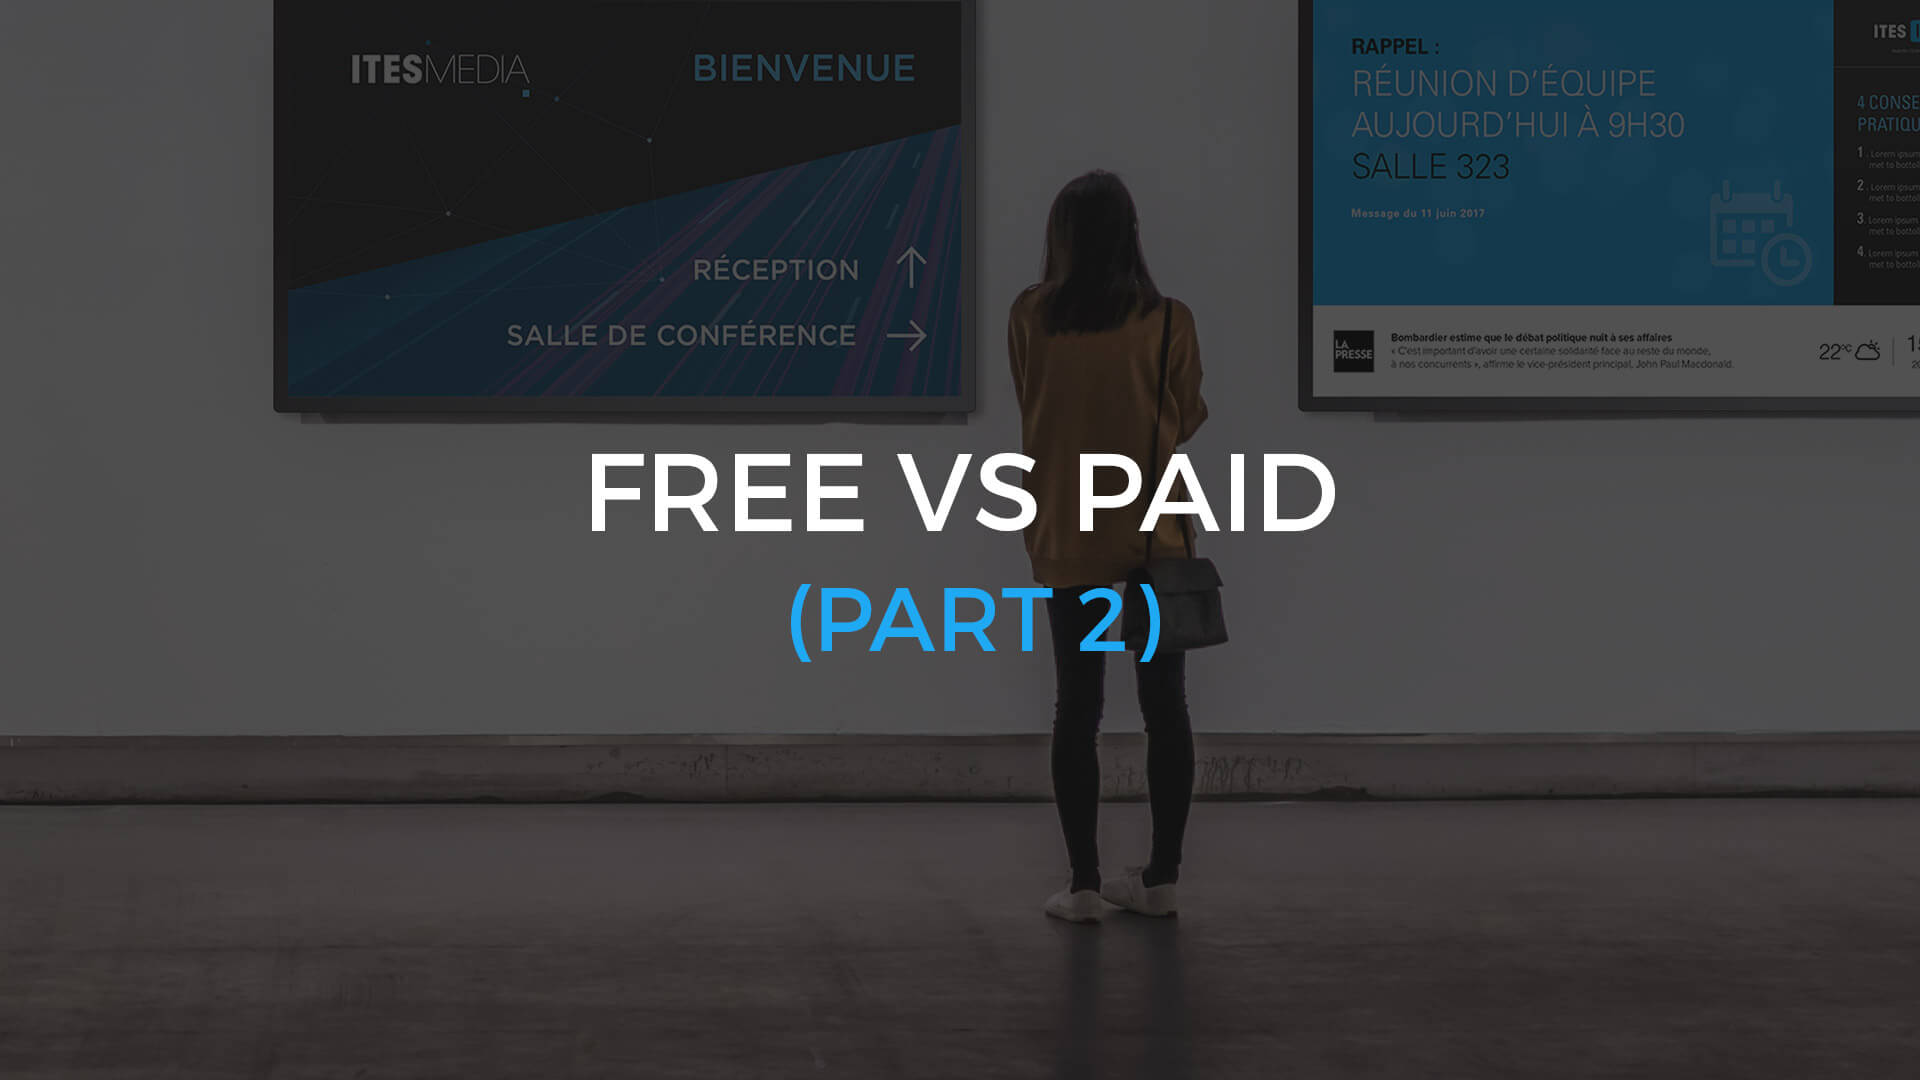 Should you choose free or paid digital display software? (Part 2)